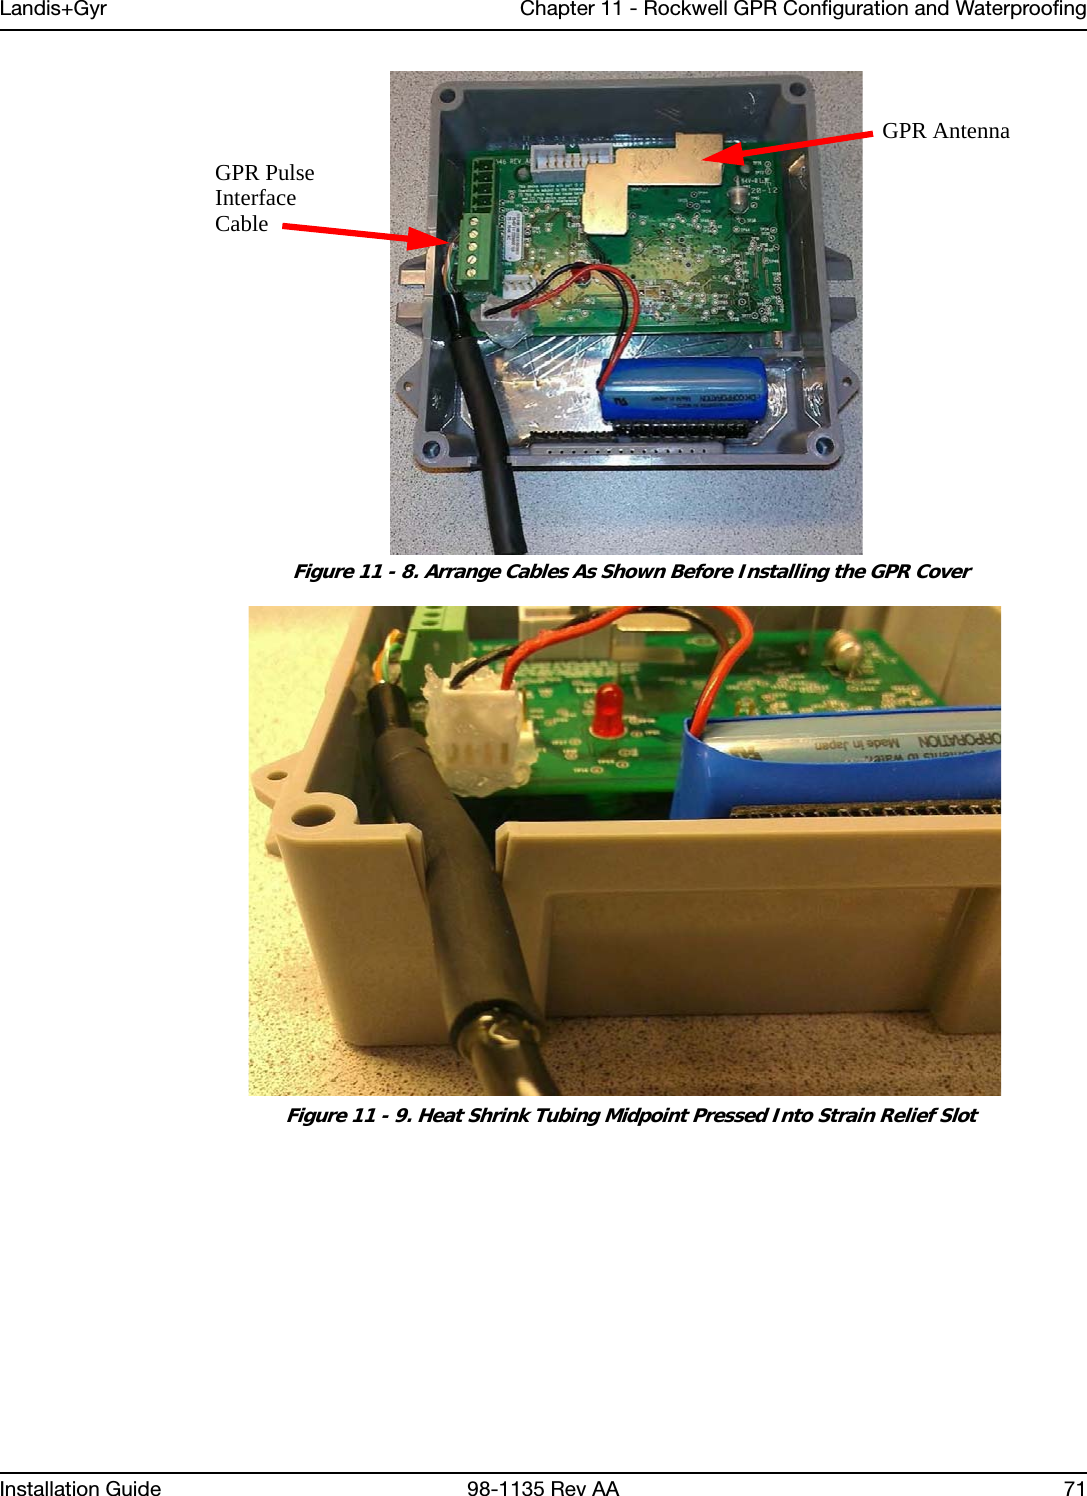 Landis+Gyr Chapter 11 - Rockwell GPR Configuration and WaterproofingInstallation Guide 98-1135 Rev AA 71 Figure 11 - 8. Arrange Cables As Shown Before Installing the GPR Cover Figure 11 - 9. Heat Shrink Tubing Midpoint Pressed Into Strain Relief SlotGPR PulseInterfaceCableGPR Antenna